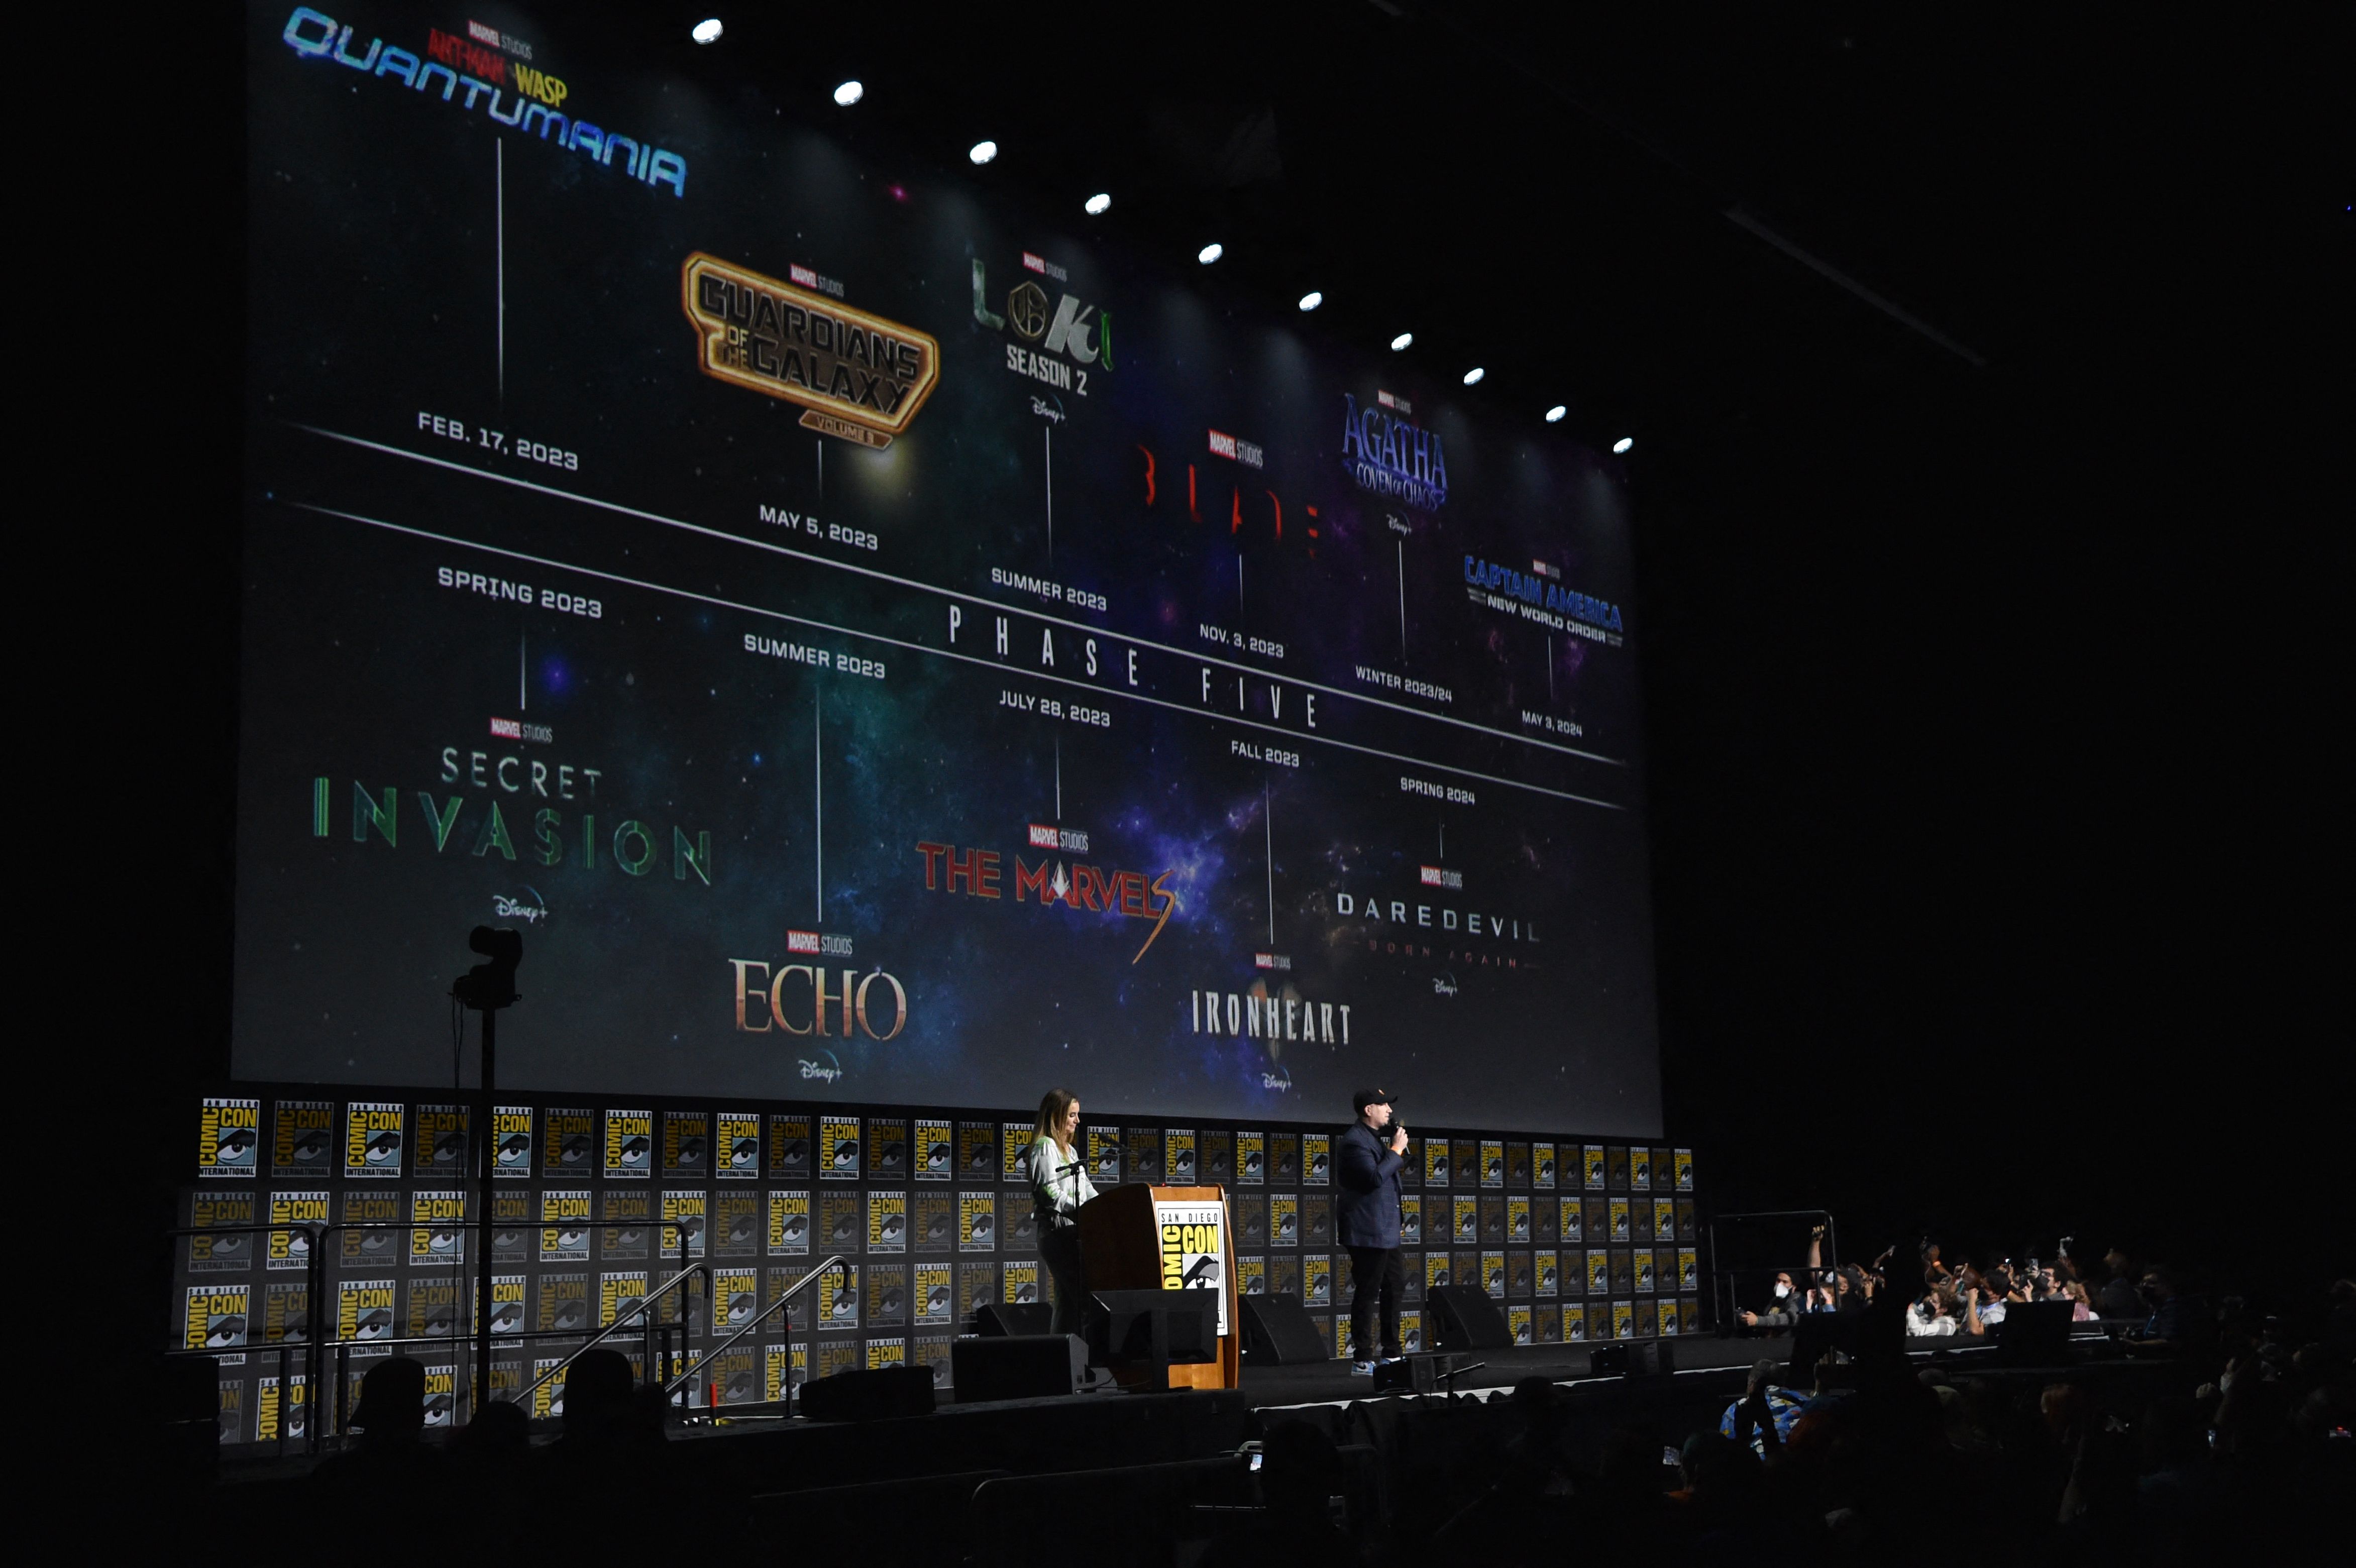 Kevin Feige appears onstage at San Diego Comic-Con 2022. He wears a gray suit, black pants, and a black baseball cap. Behind him is the MCU: Phase 5 schedule.